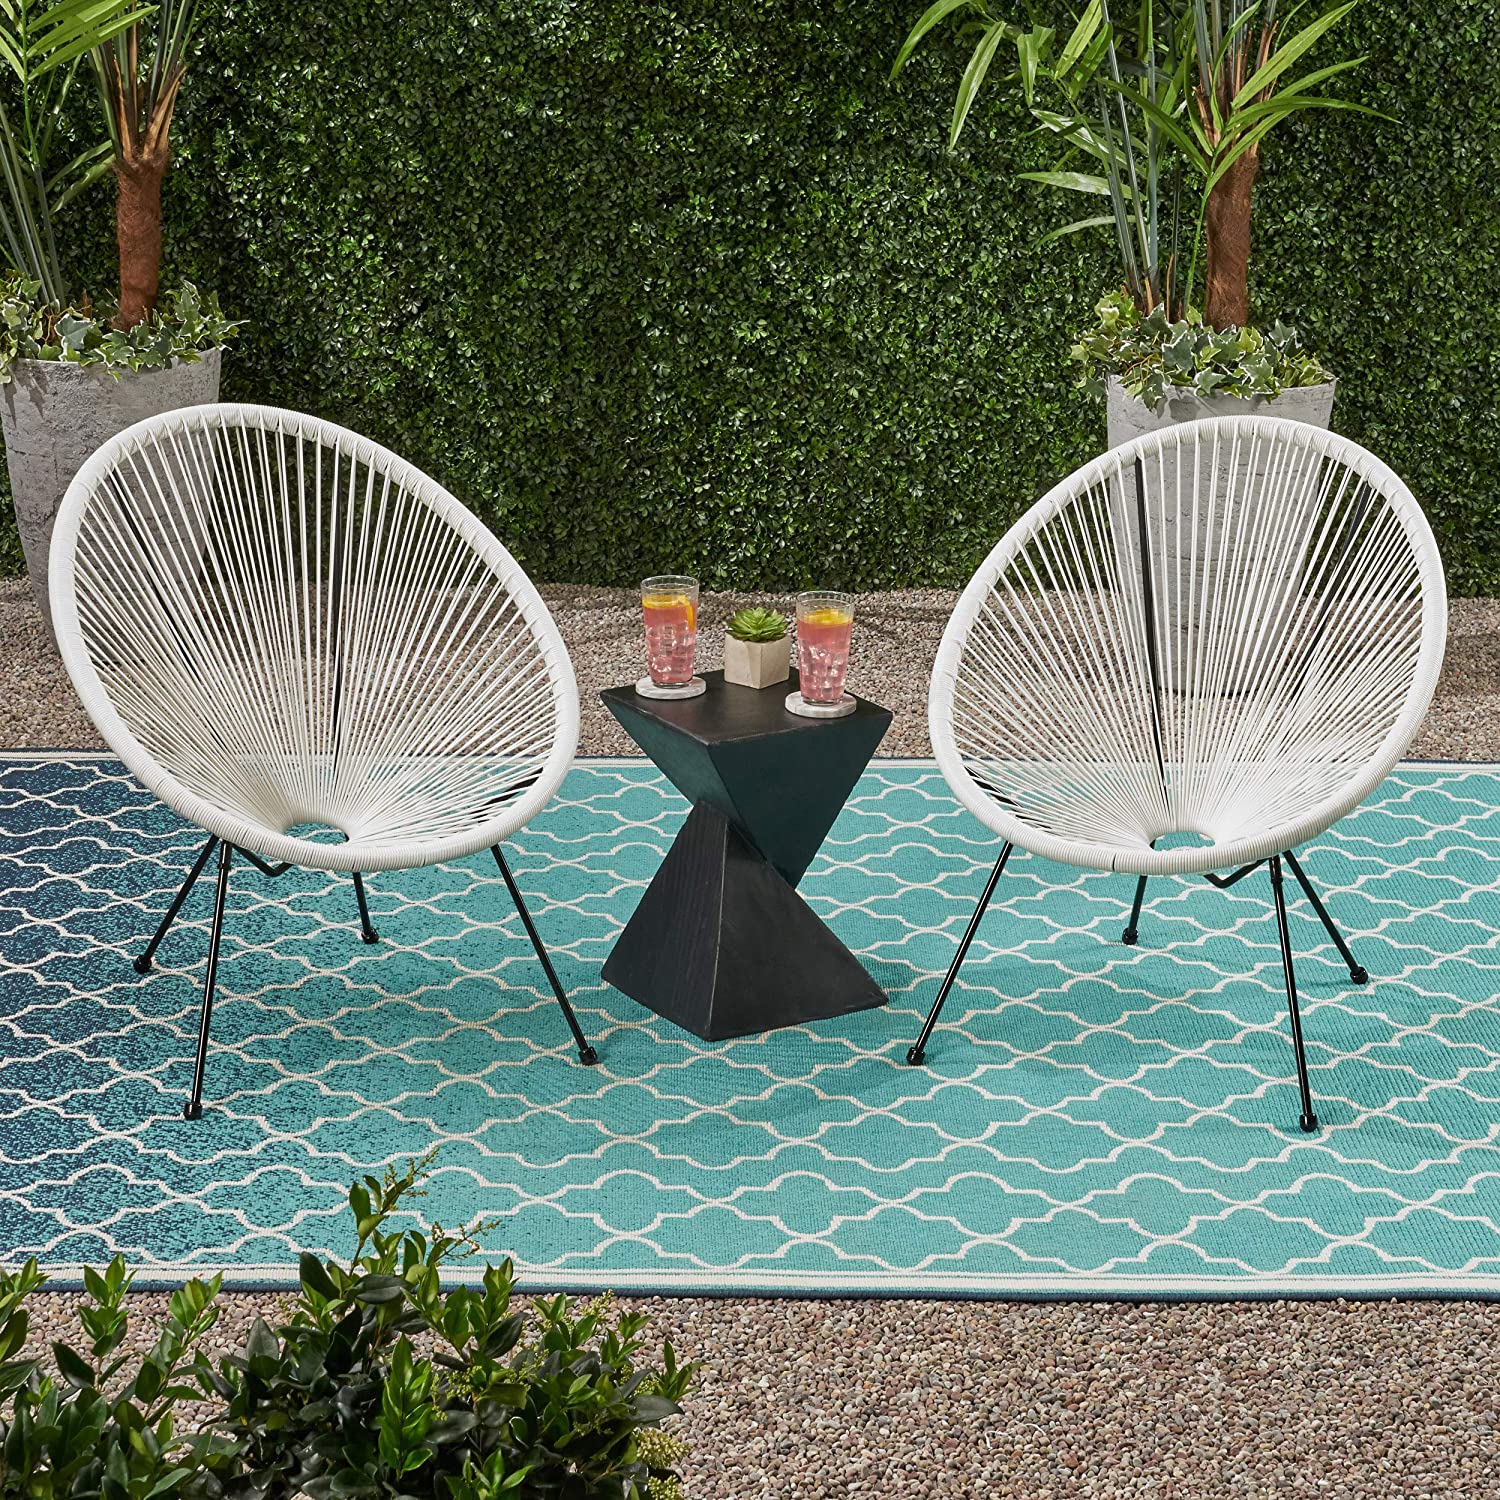 Kevinplus Outdoor Hammock Weave Chair with Steel Frame, Patio Chair Set of 2 Weave Lounge Chair Sun Oval Chair Indoor Outdoor Chairs - image 1 of 7